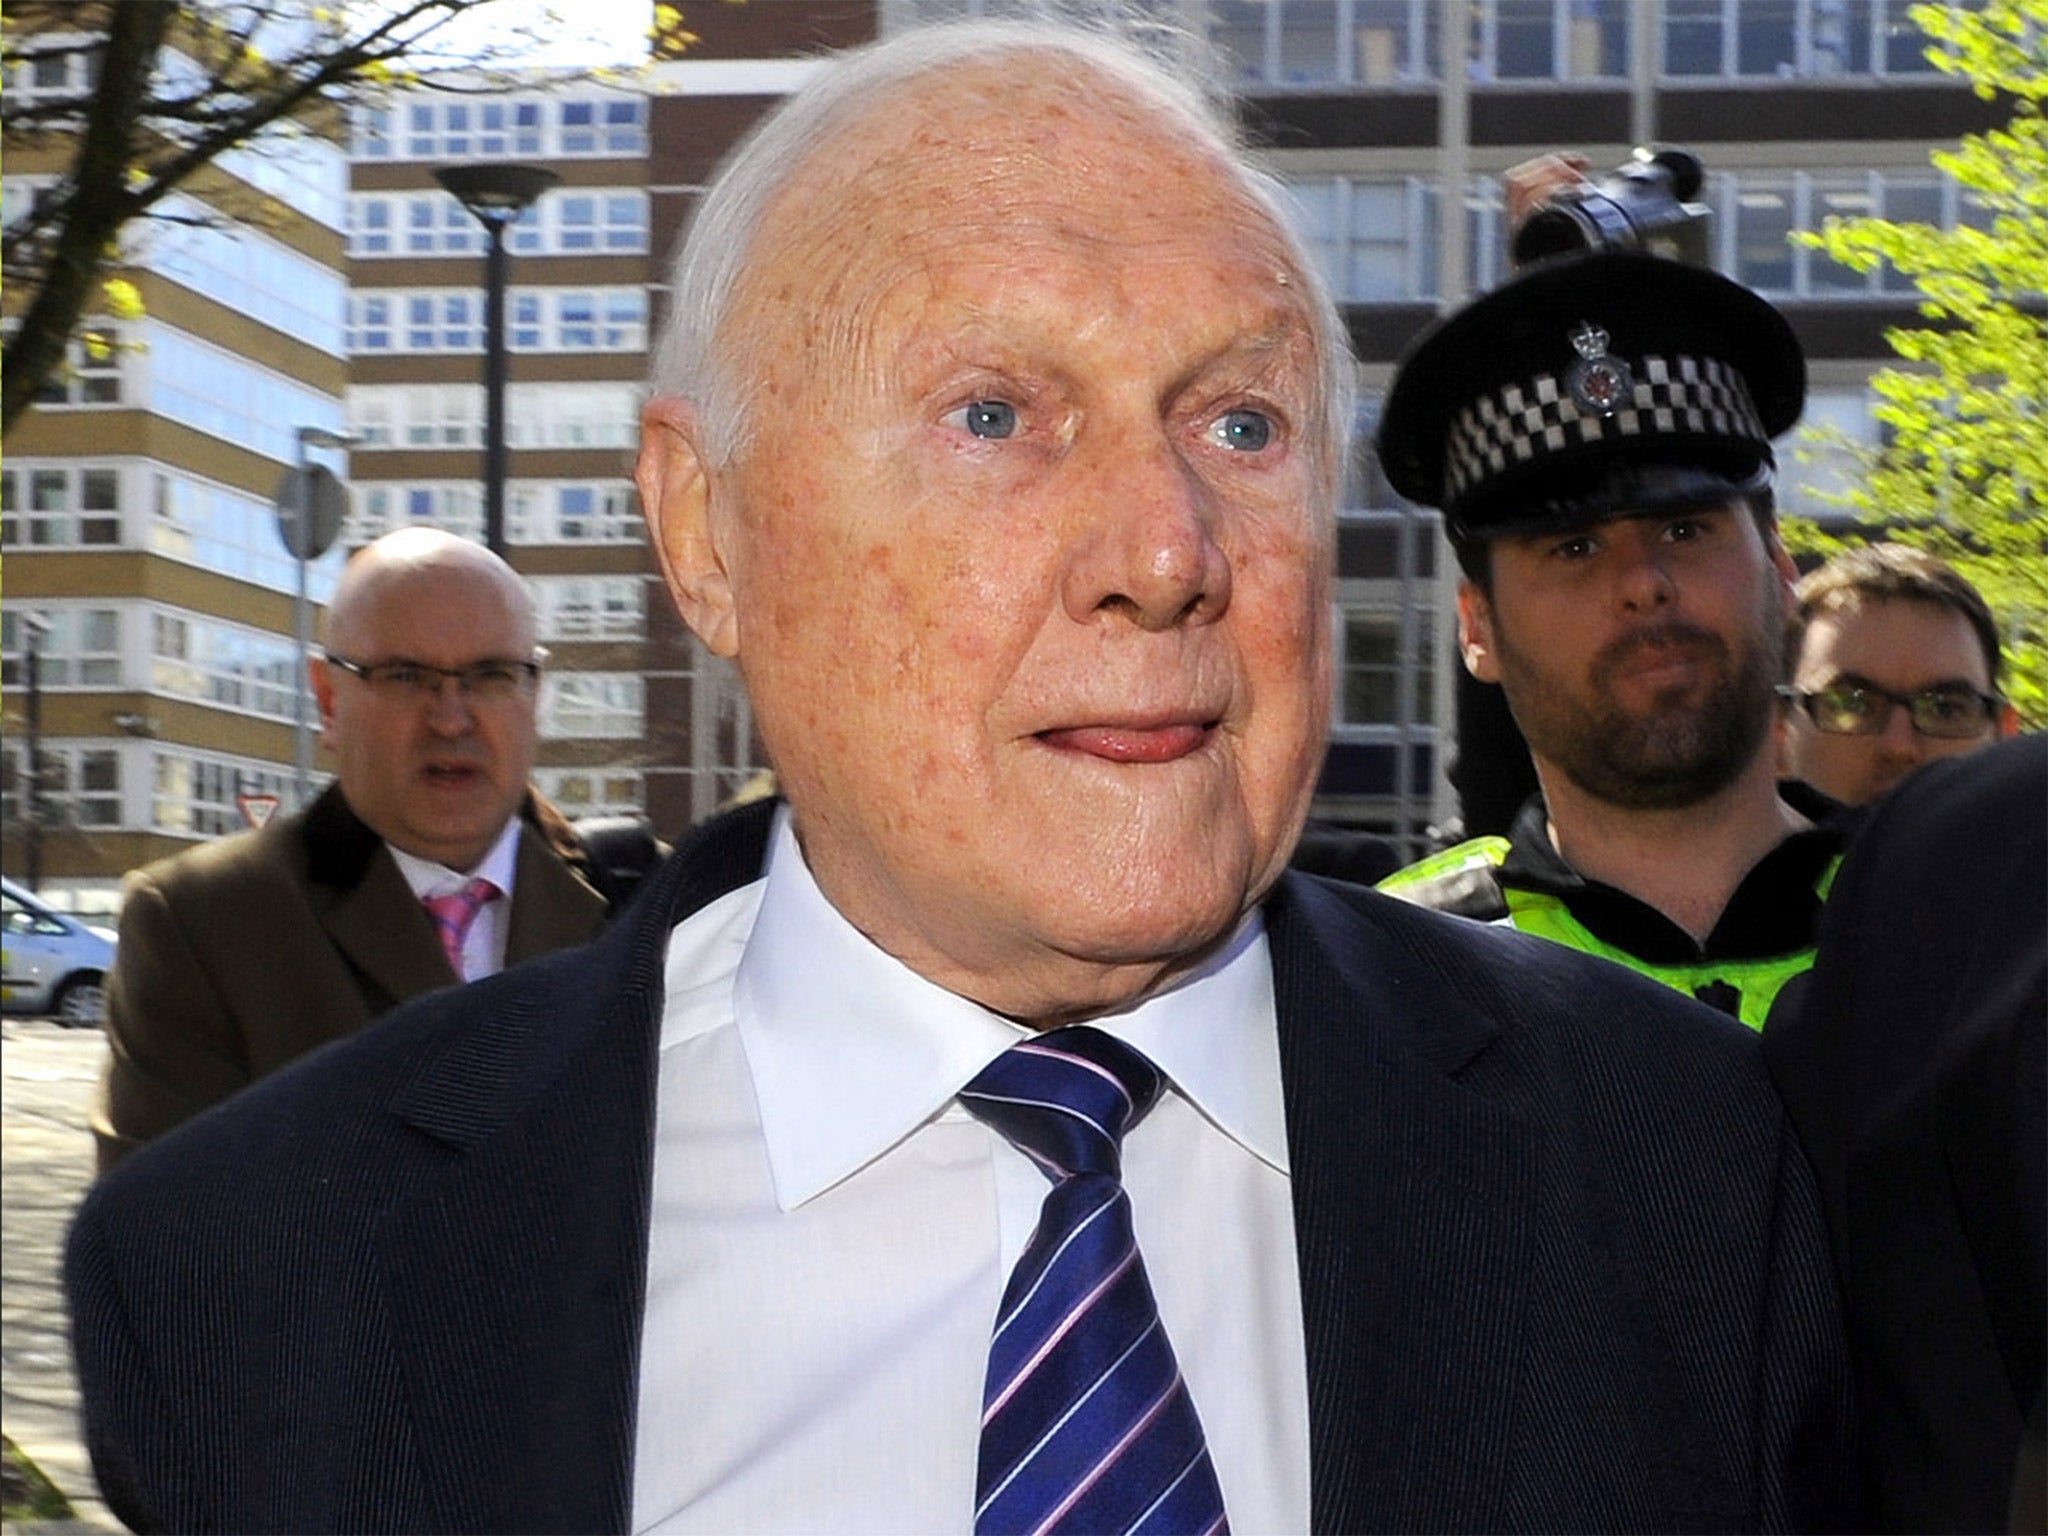 Stuart Hall who has been released from prison ahead of his 86th birthday next week